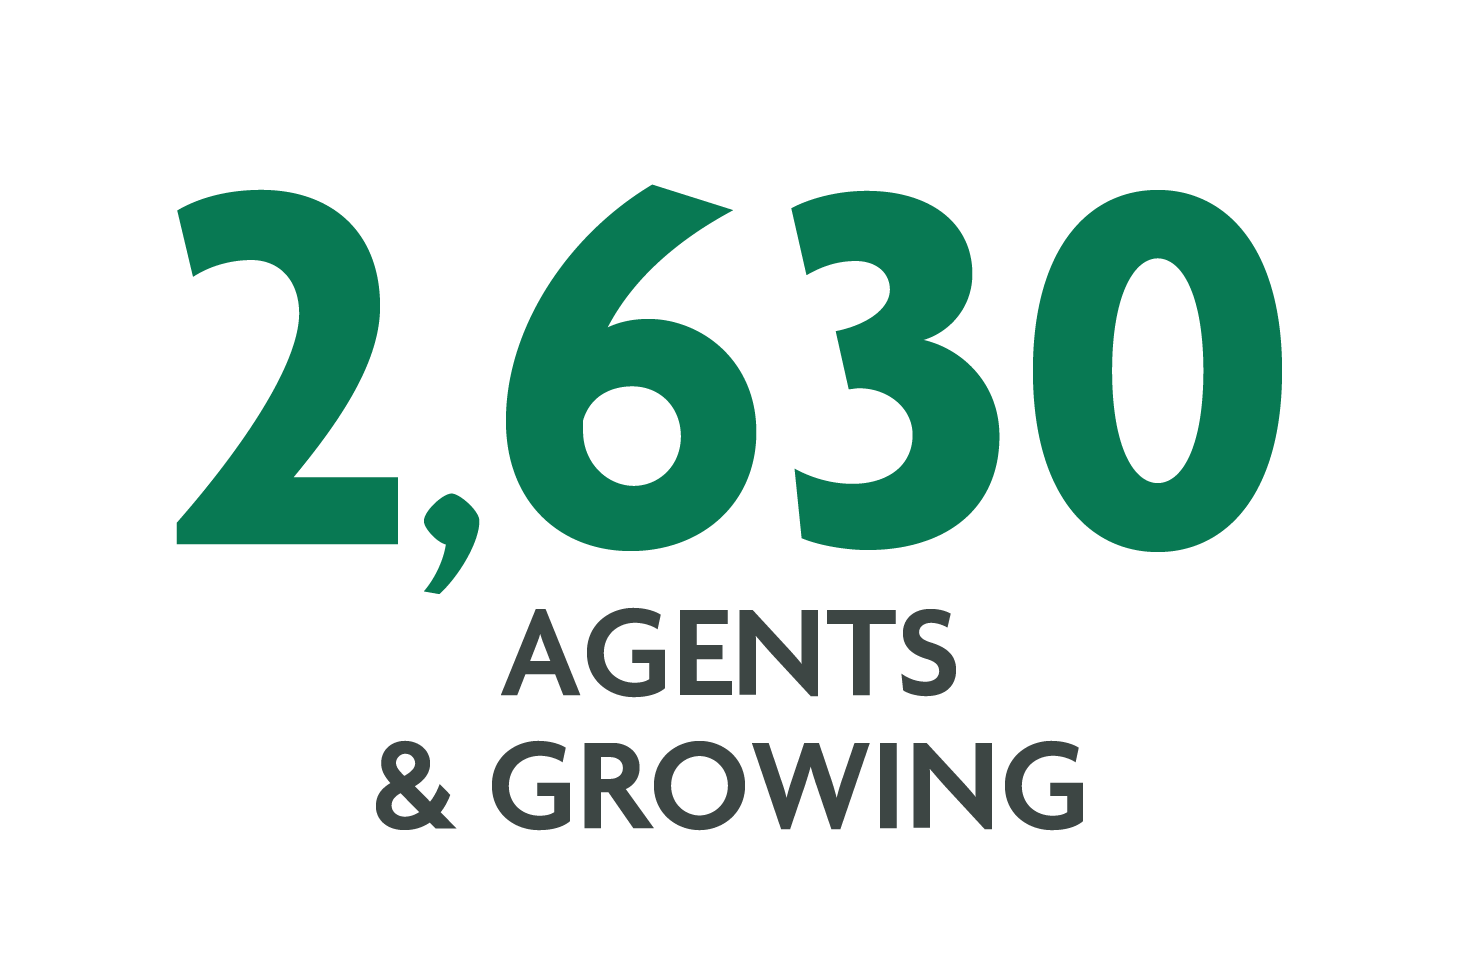 2,630 Agents & Growing